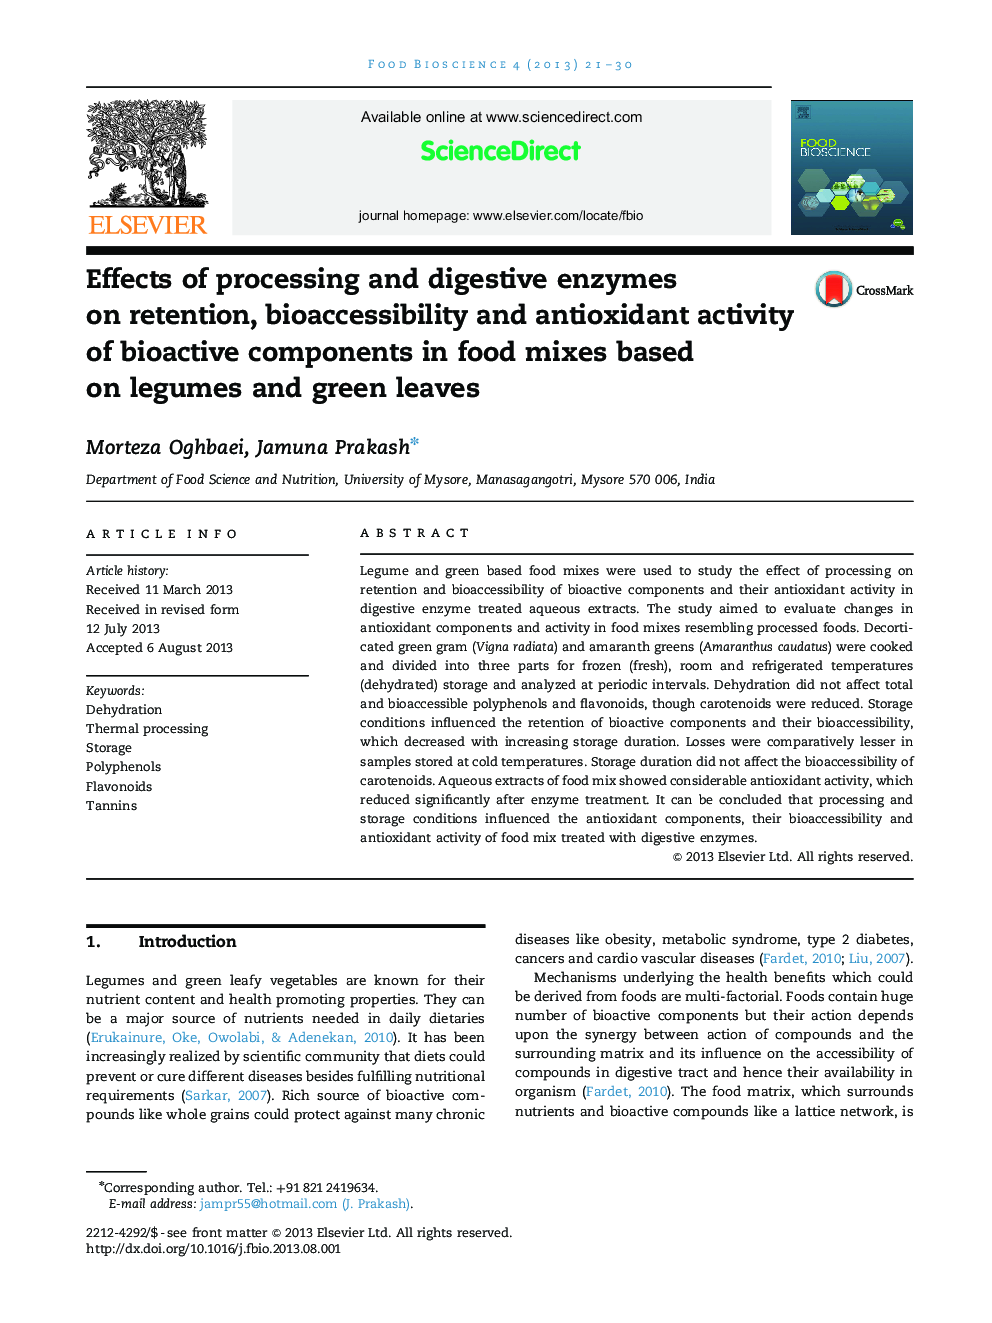 Effects of processing and digestive enzymes on retention, bioaccessibility and antioxidant activity of bioactive components in food mixes based on legumes and green leaves